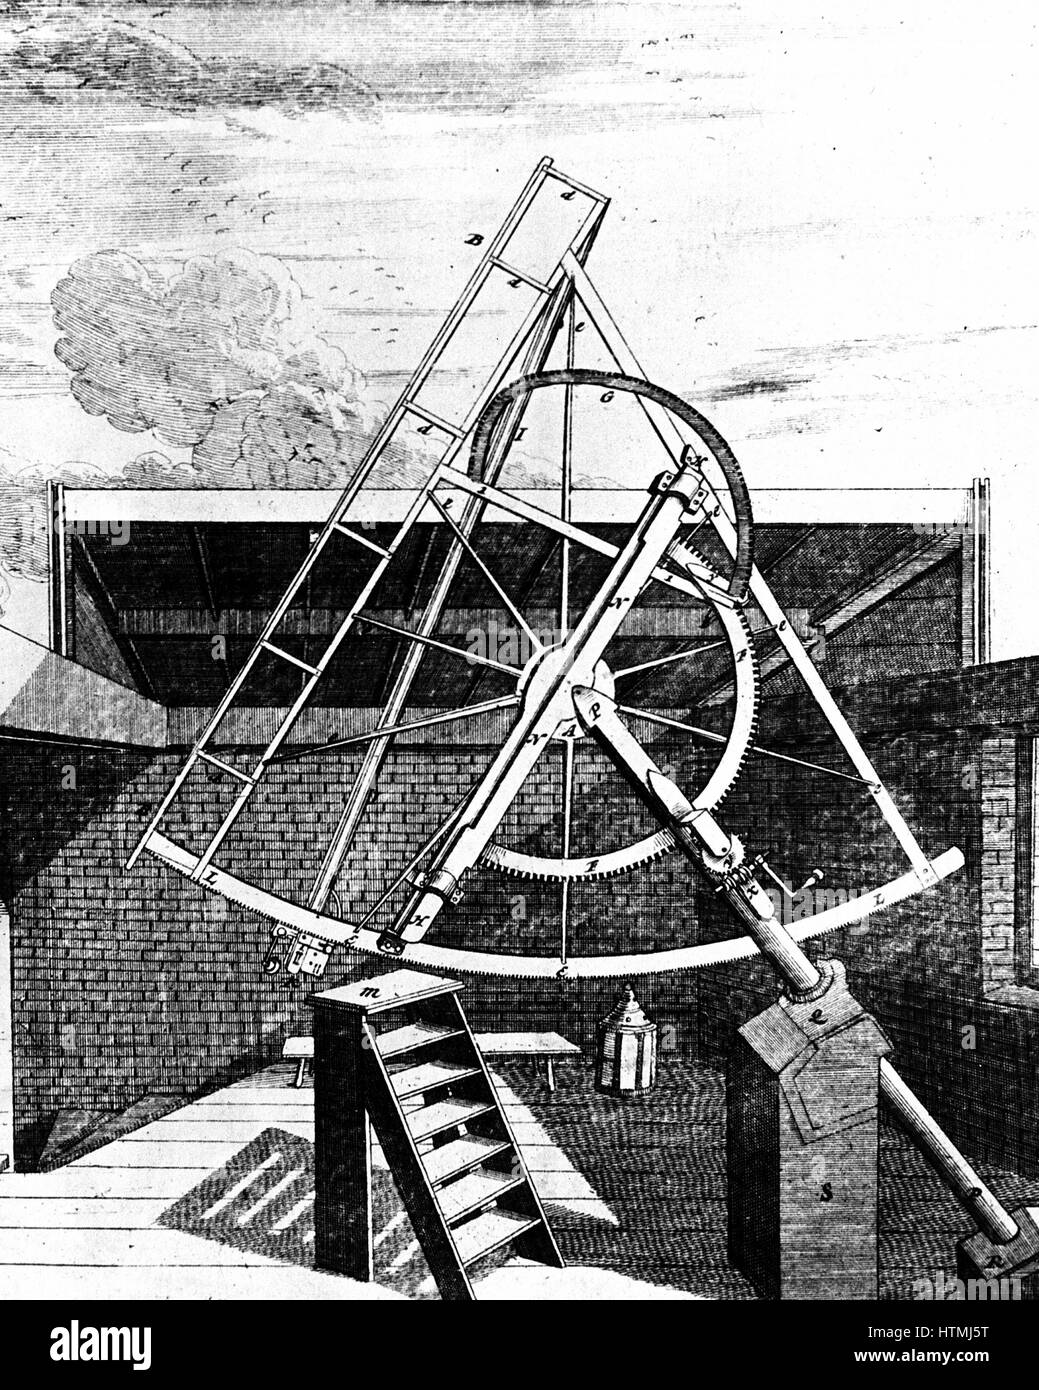 Flamsteed's equatorially mounted sextant fitted with telescope. Side  showing gearing for aligning sextant. Flamsteed was the first Astronomer  Royal. From "Historia Coelestis Britannica" John Flamsteed (London 1725).  Engraving Stock Photo - Alamy